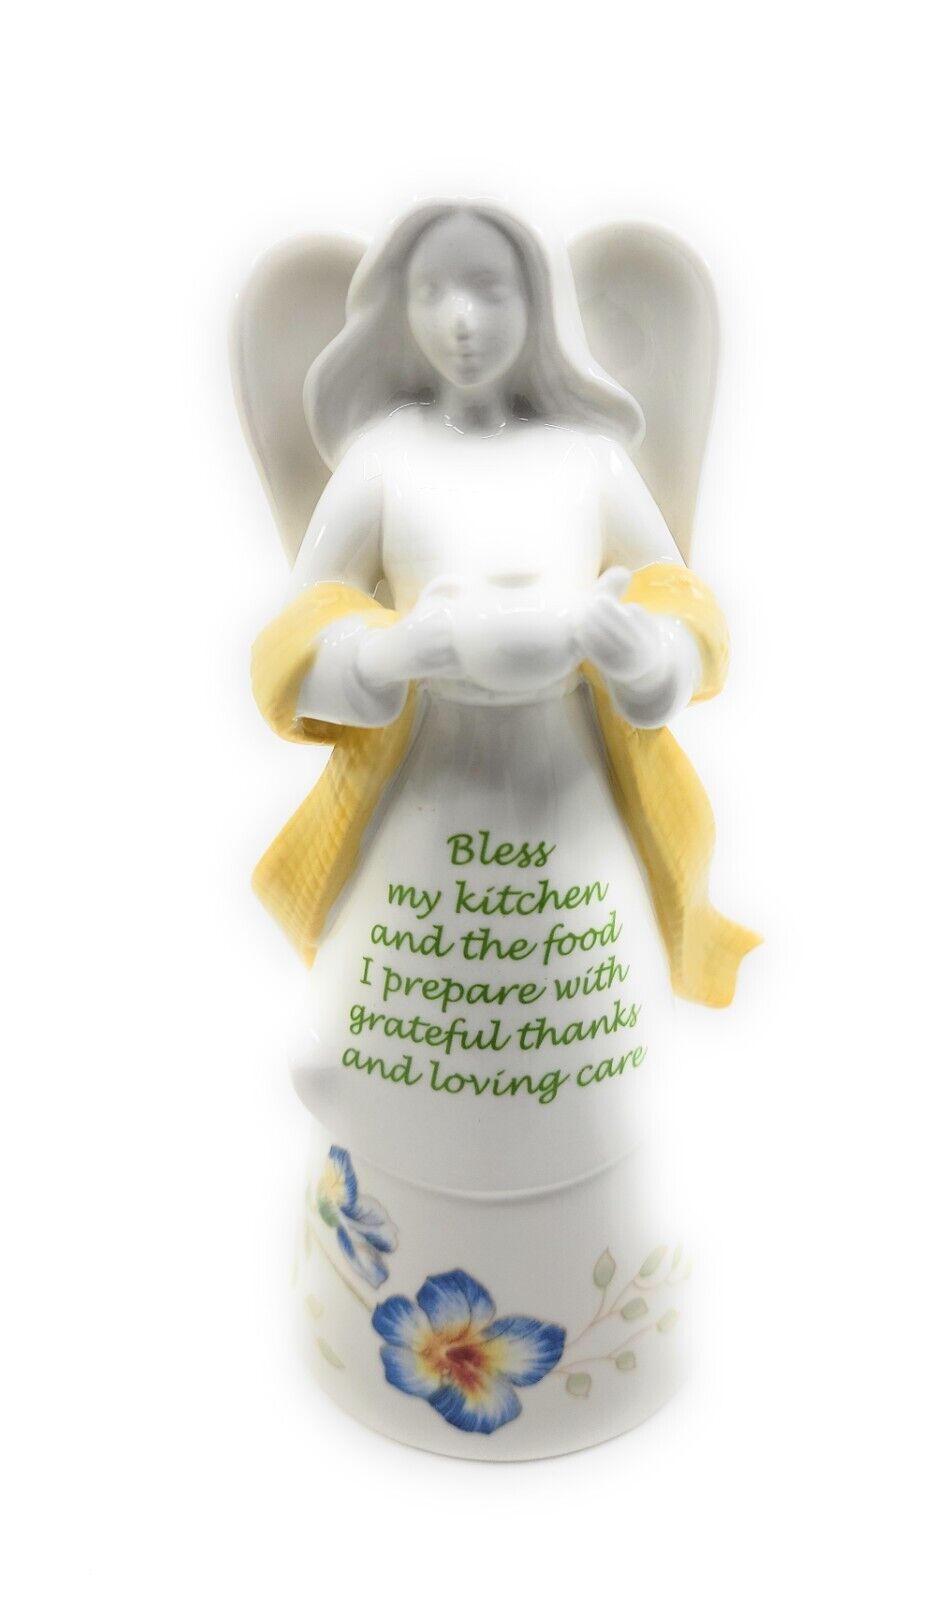 Lenox Bless My Kitchen Angel Bell Graceful 7-Inch Figurines for Culinary Charm